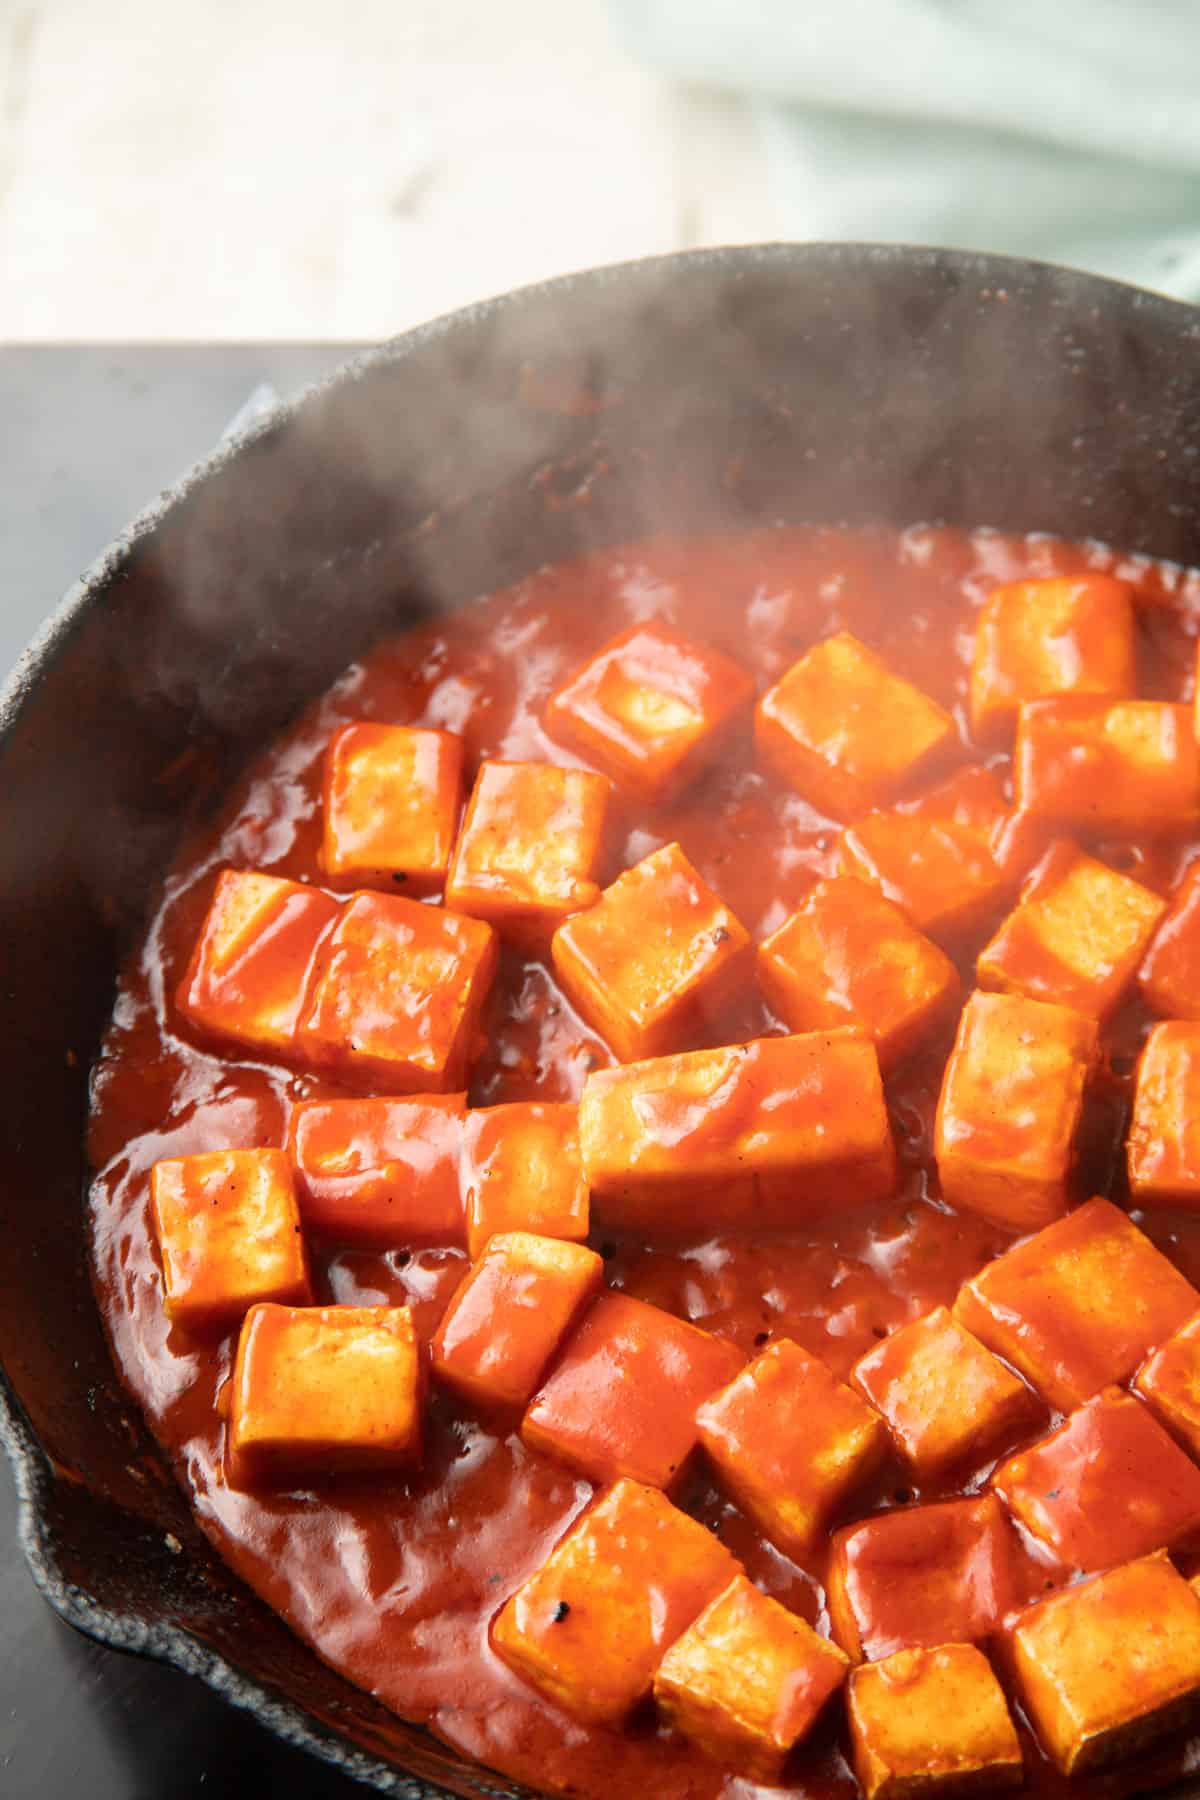 Tofu cooking in gochujang sauce in a skillet.